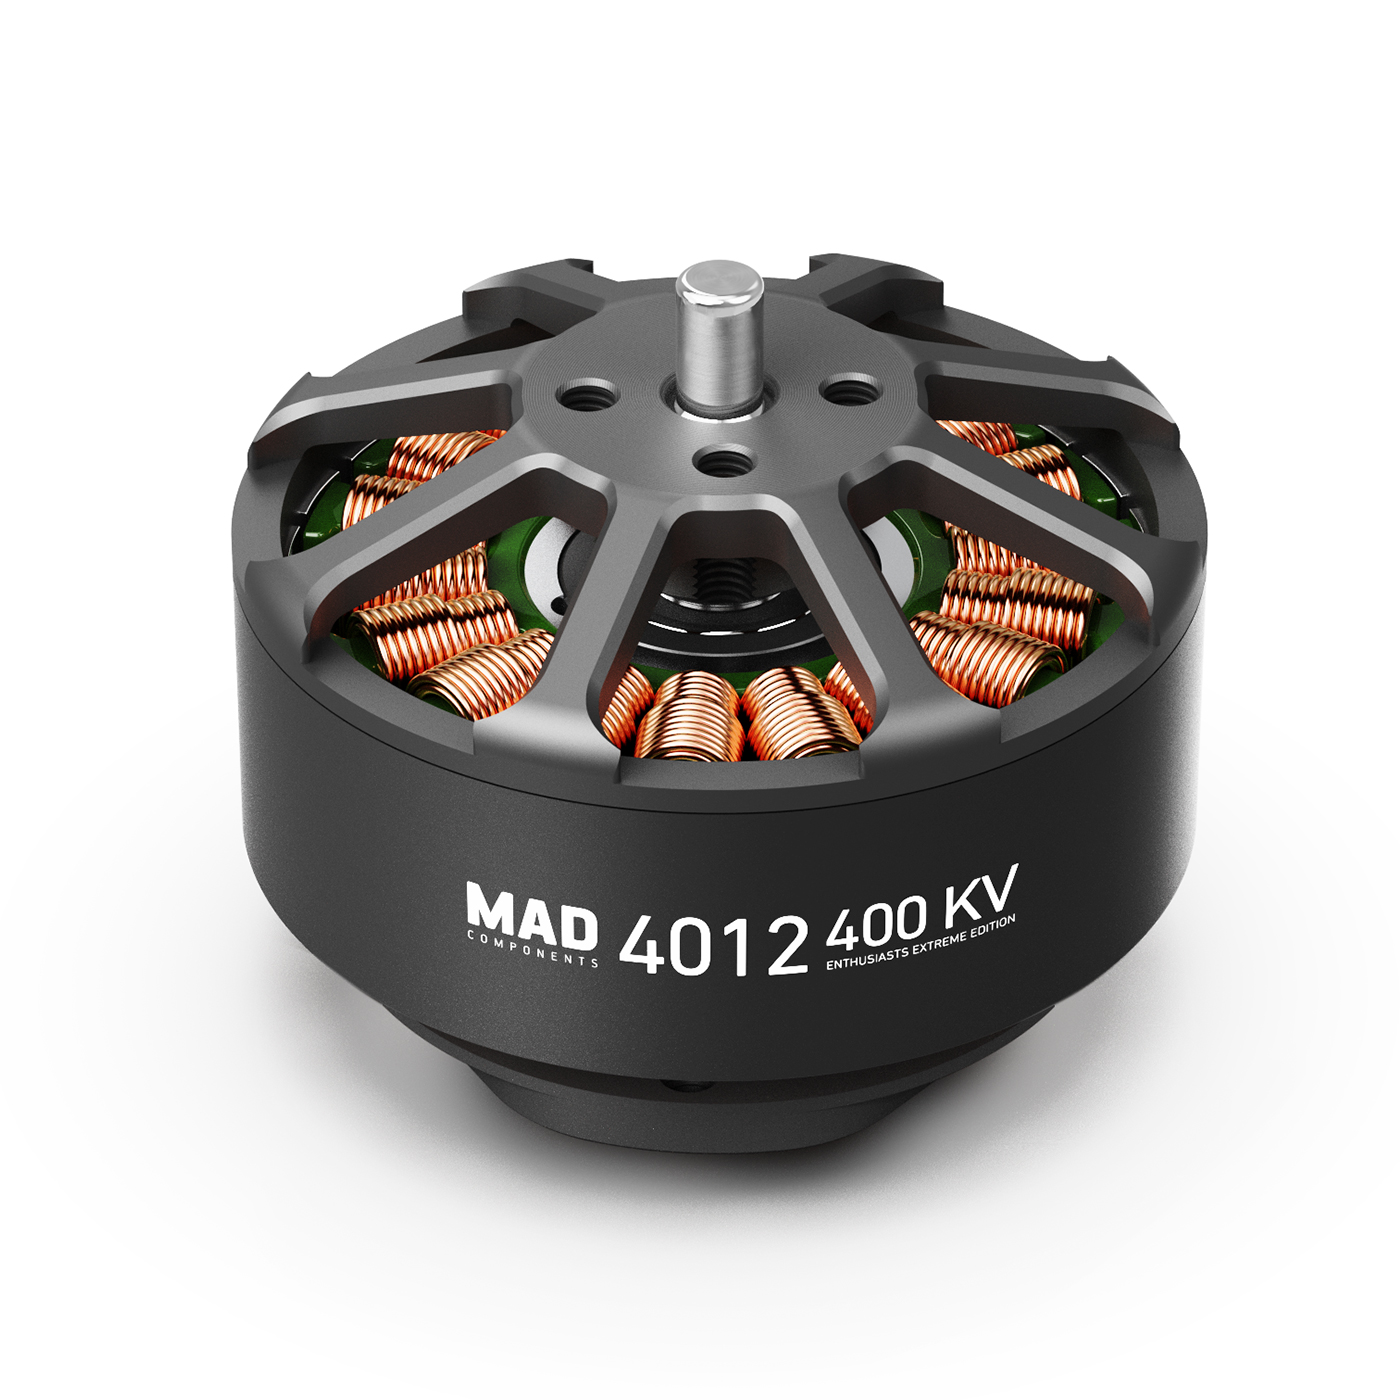 MAD 4012 EEE brushless motor for the long-range inspection drone mapping drone surveying drone quadcopter hexcopter mulitirotor